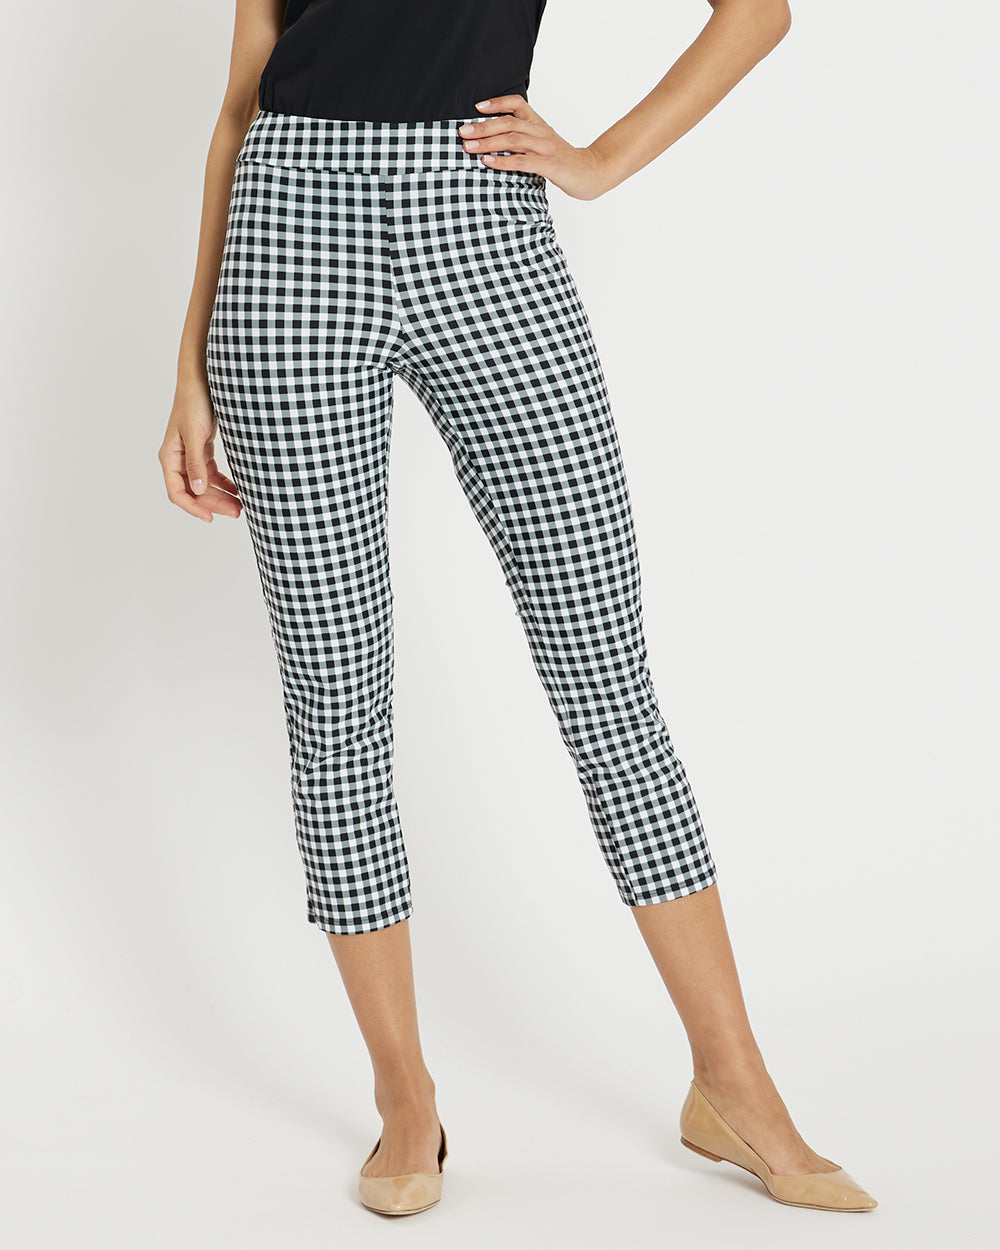 Lucia Pant Jude Cloth in Gingham Black| Jude Connally